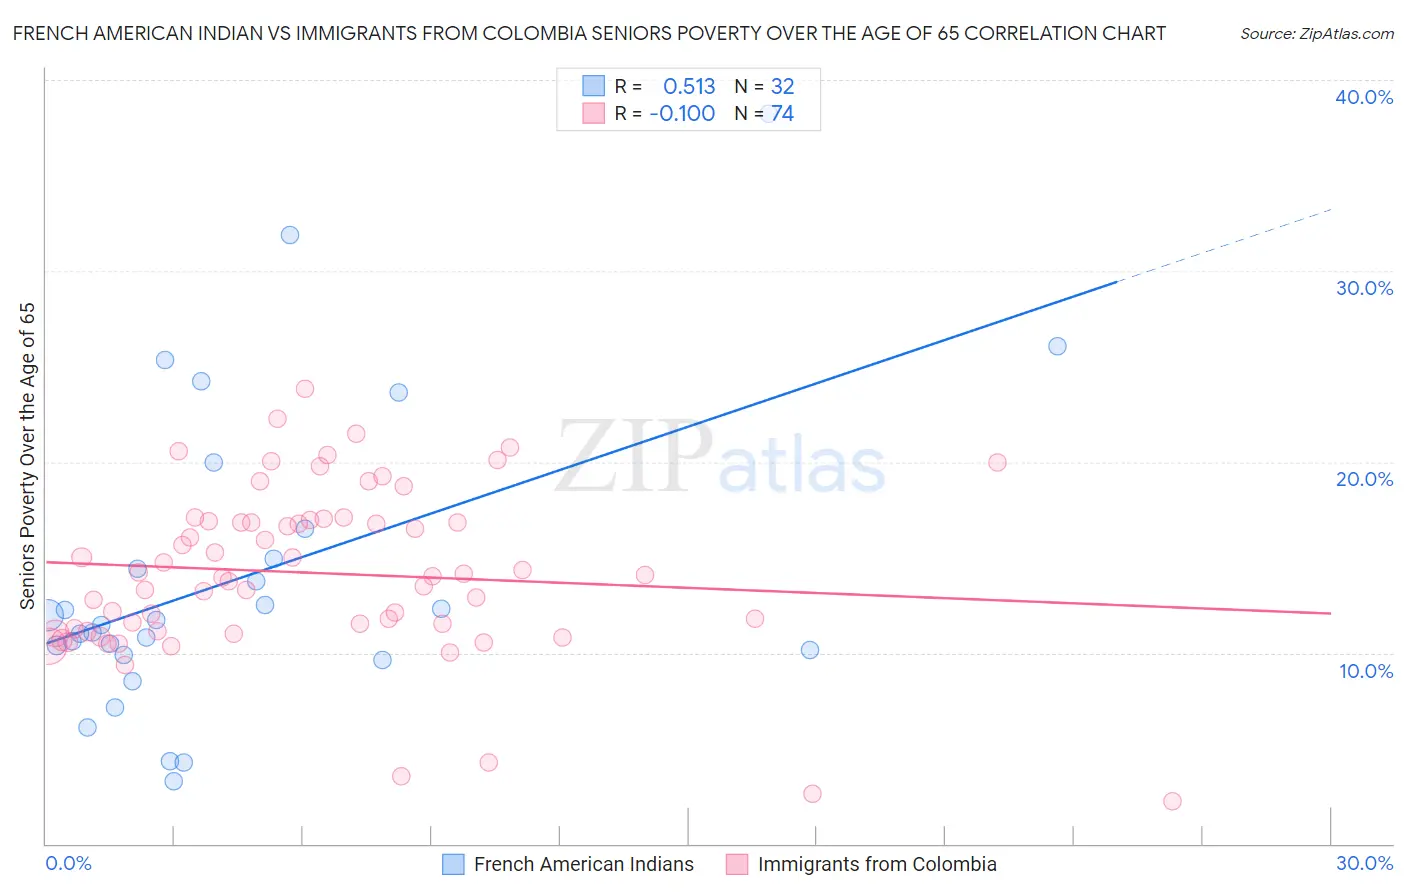 French American Indian vs Immigrants from Colombia Seniors Poverty Over the Age of 65